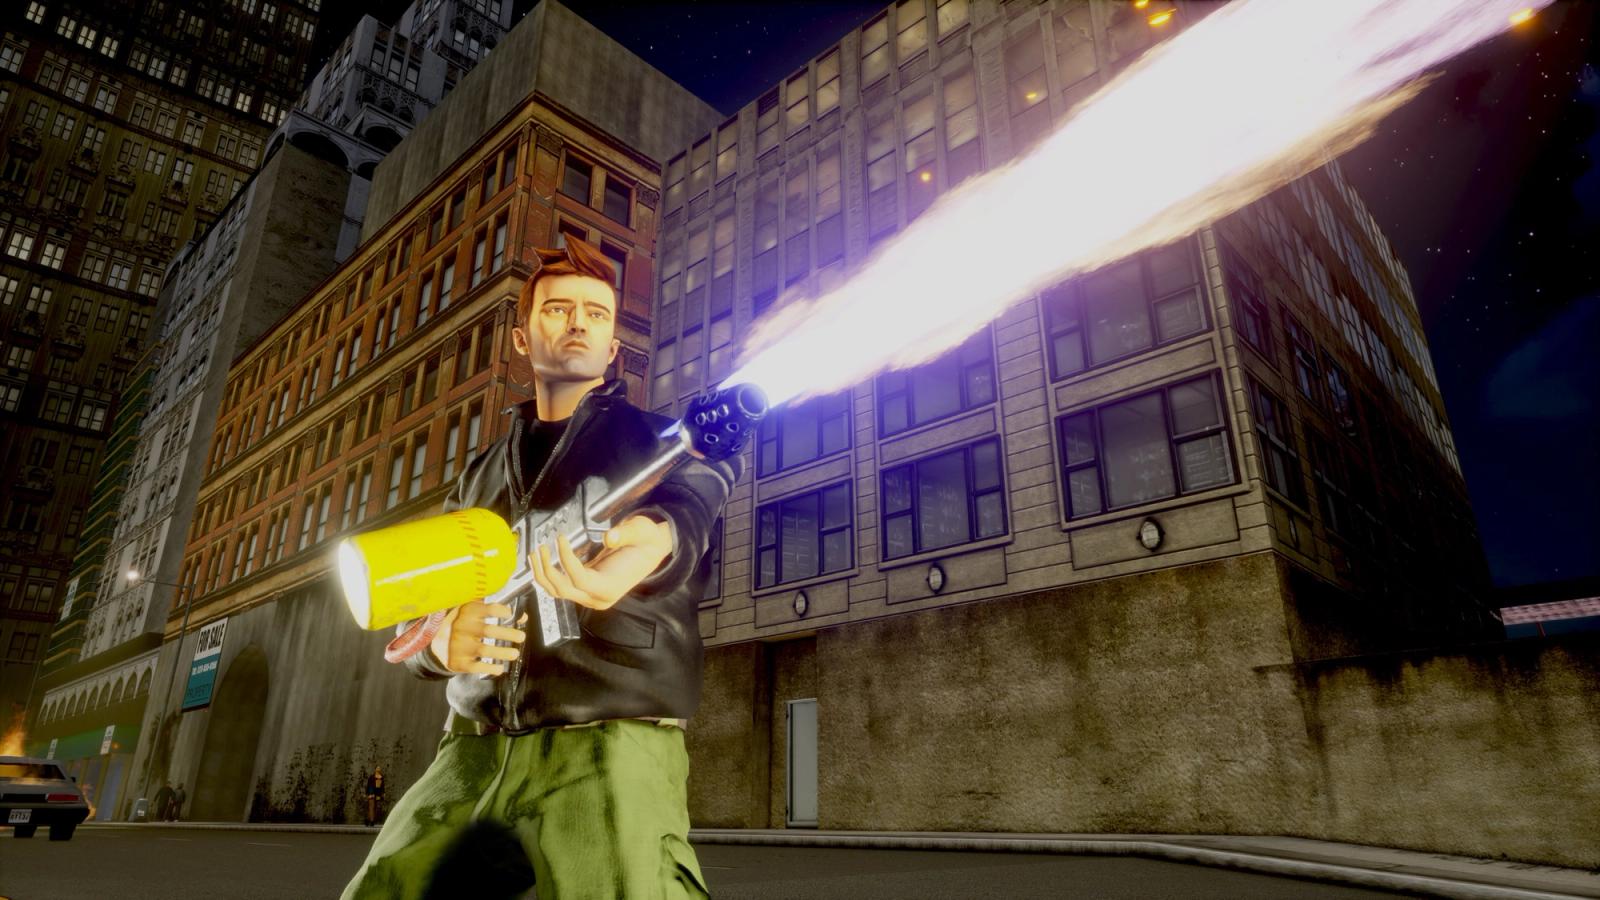 A man in green cargo pants and a leather jacket stands in front of some industrial-looking buildings, firing a flamethrower.